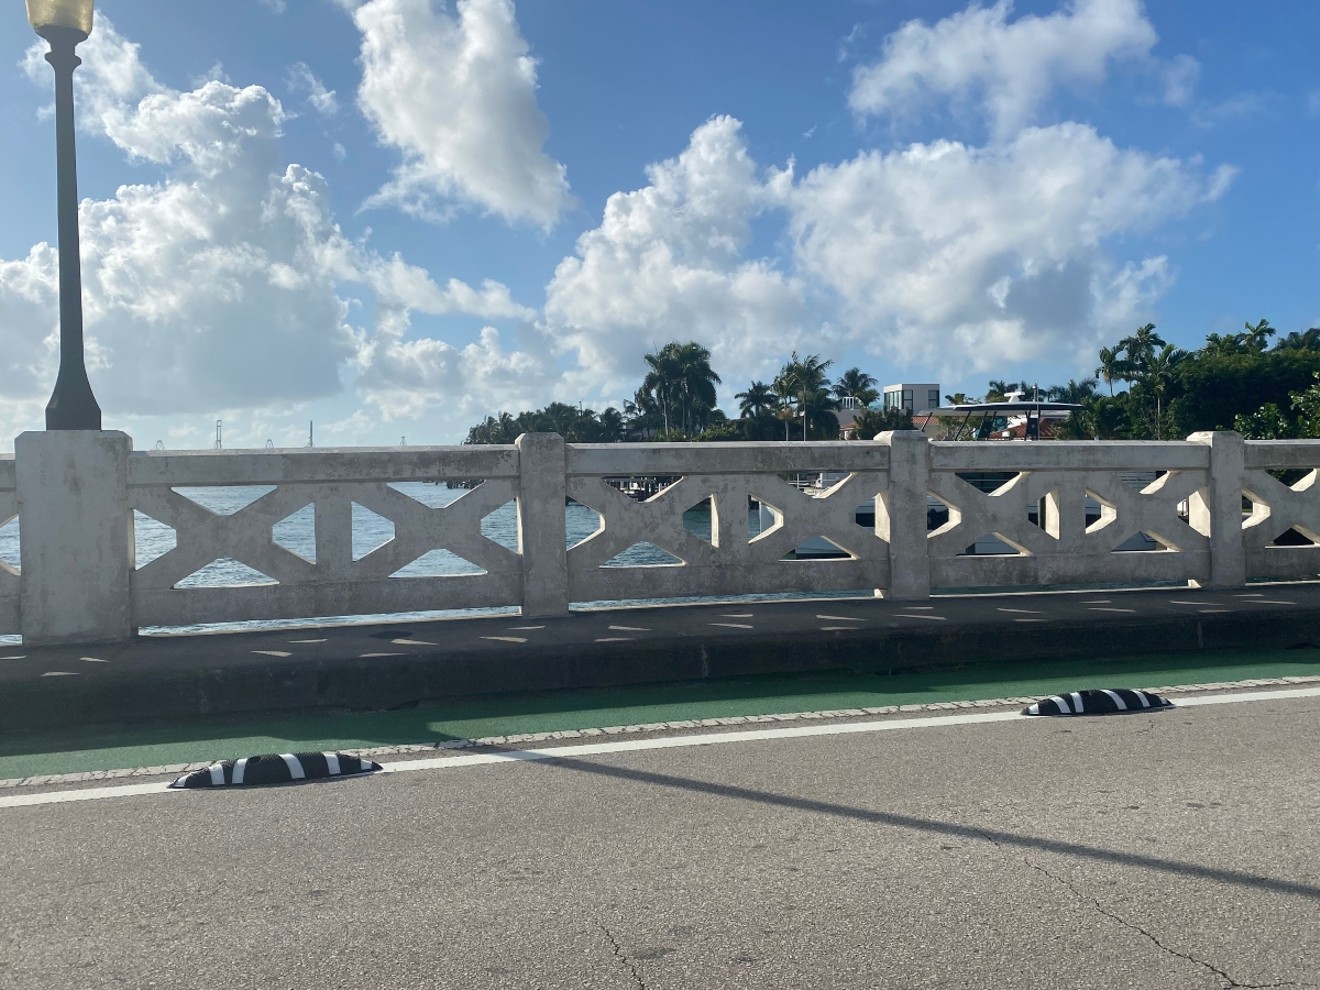 Plastic "armadillos" were recently installed on the Venetian Causeway.